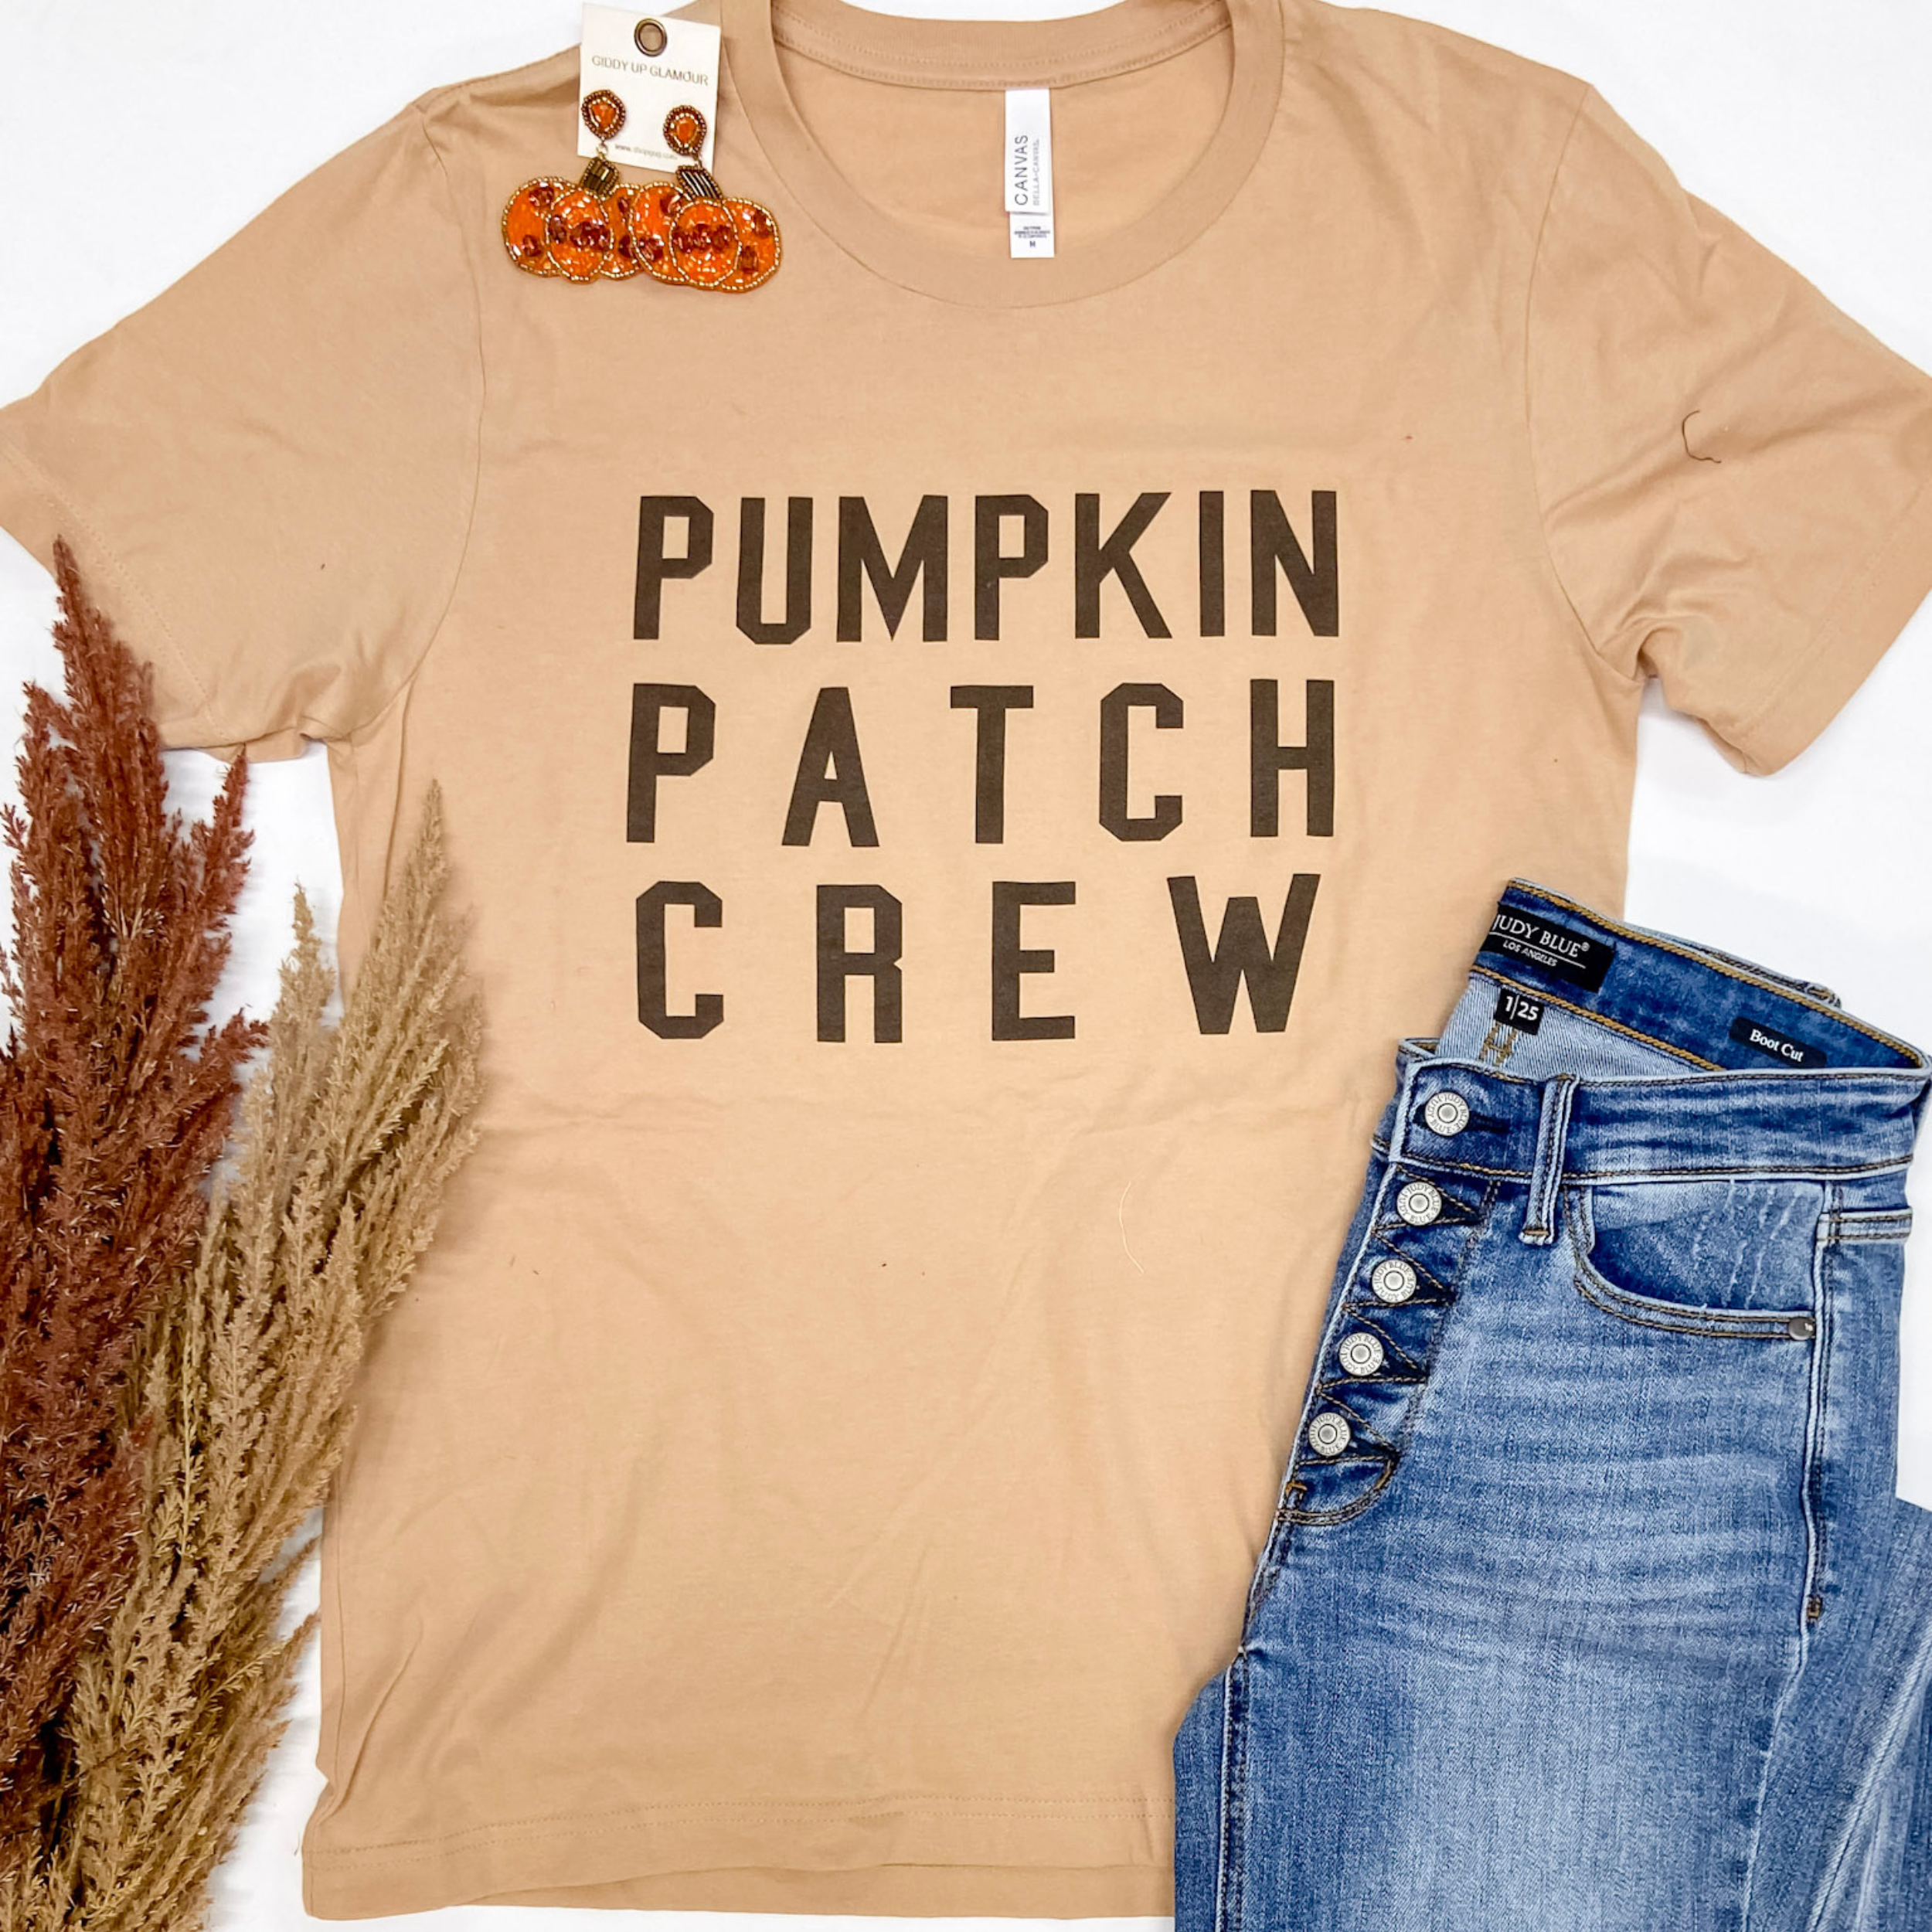 Last Chance Size Medium | Pumpkin Patch Crew Short Sleeve Graphic Tee in Tan - Giddy Up Glamour Boutique